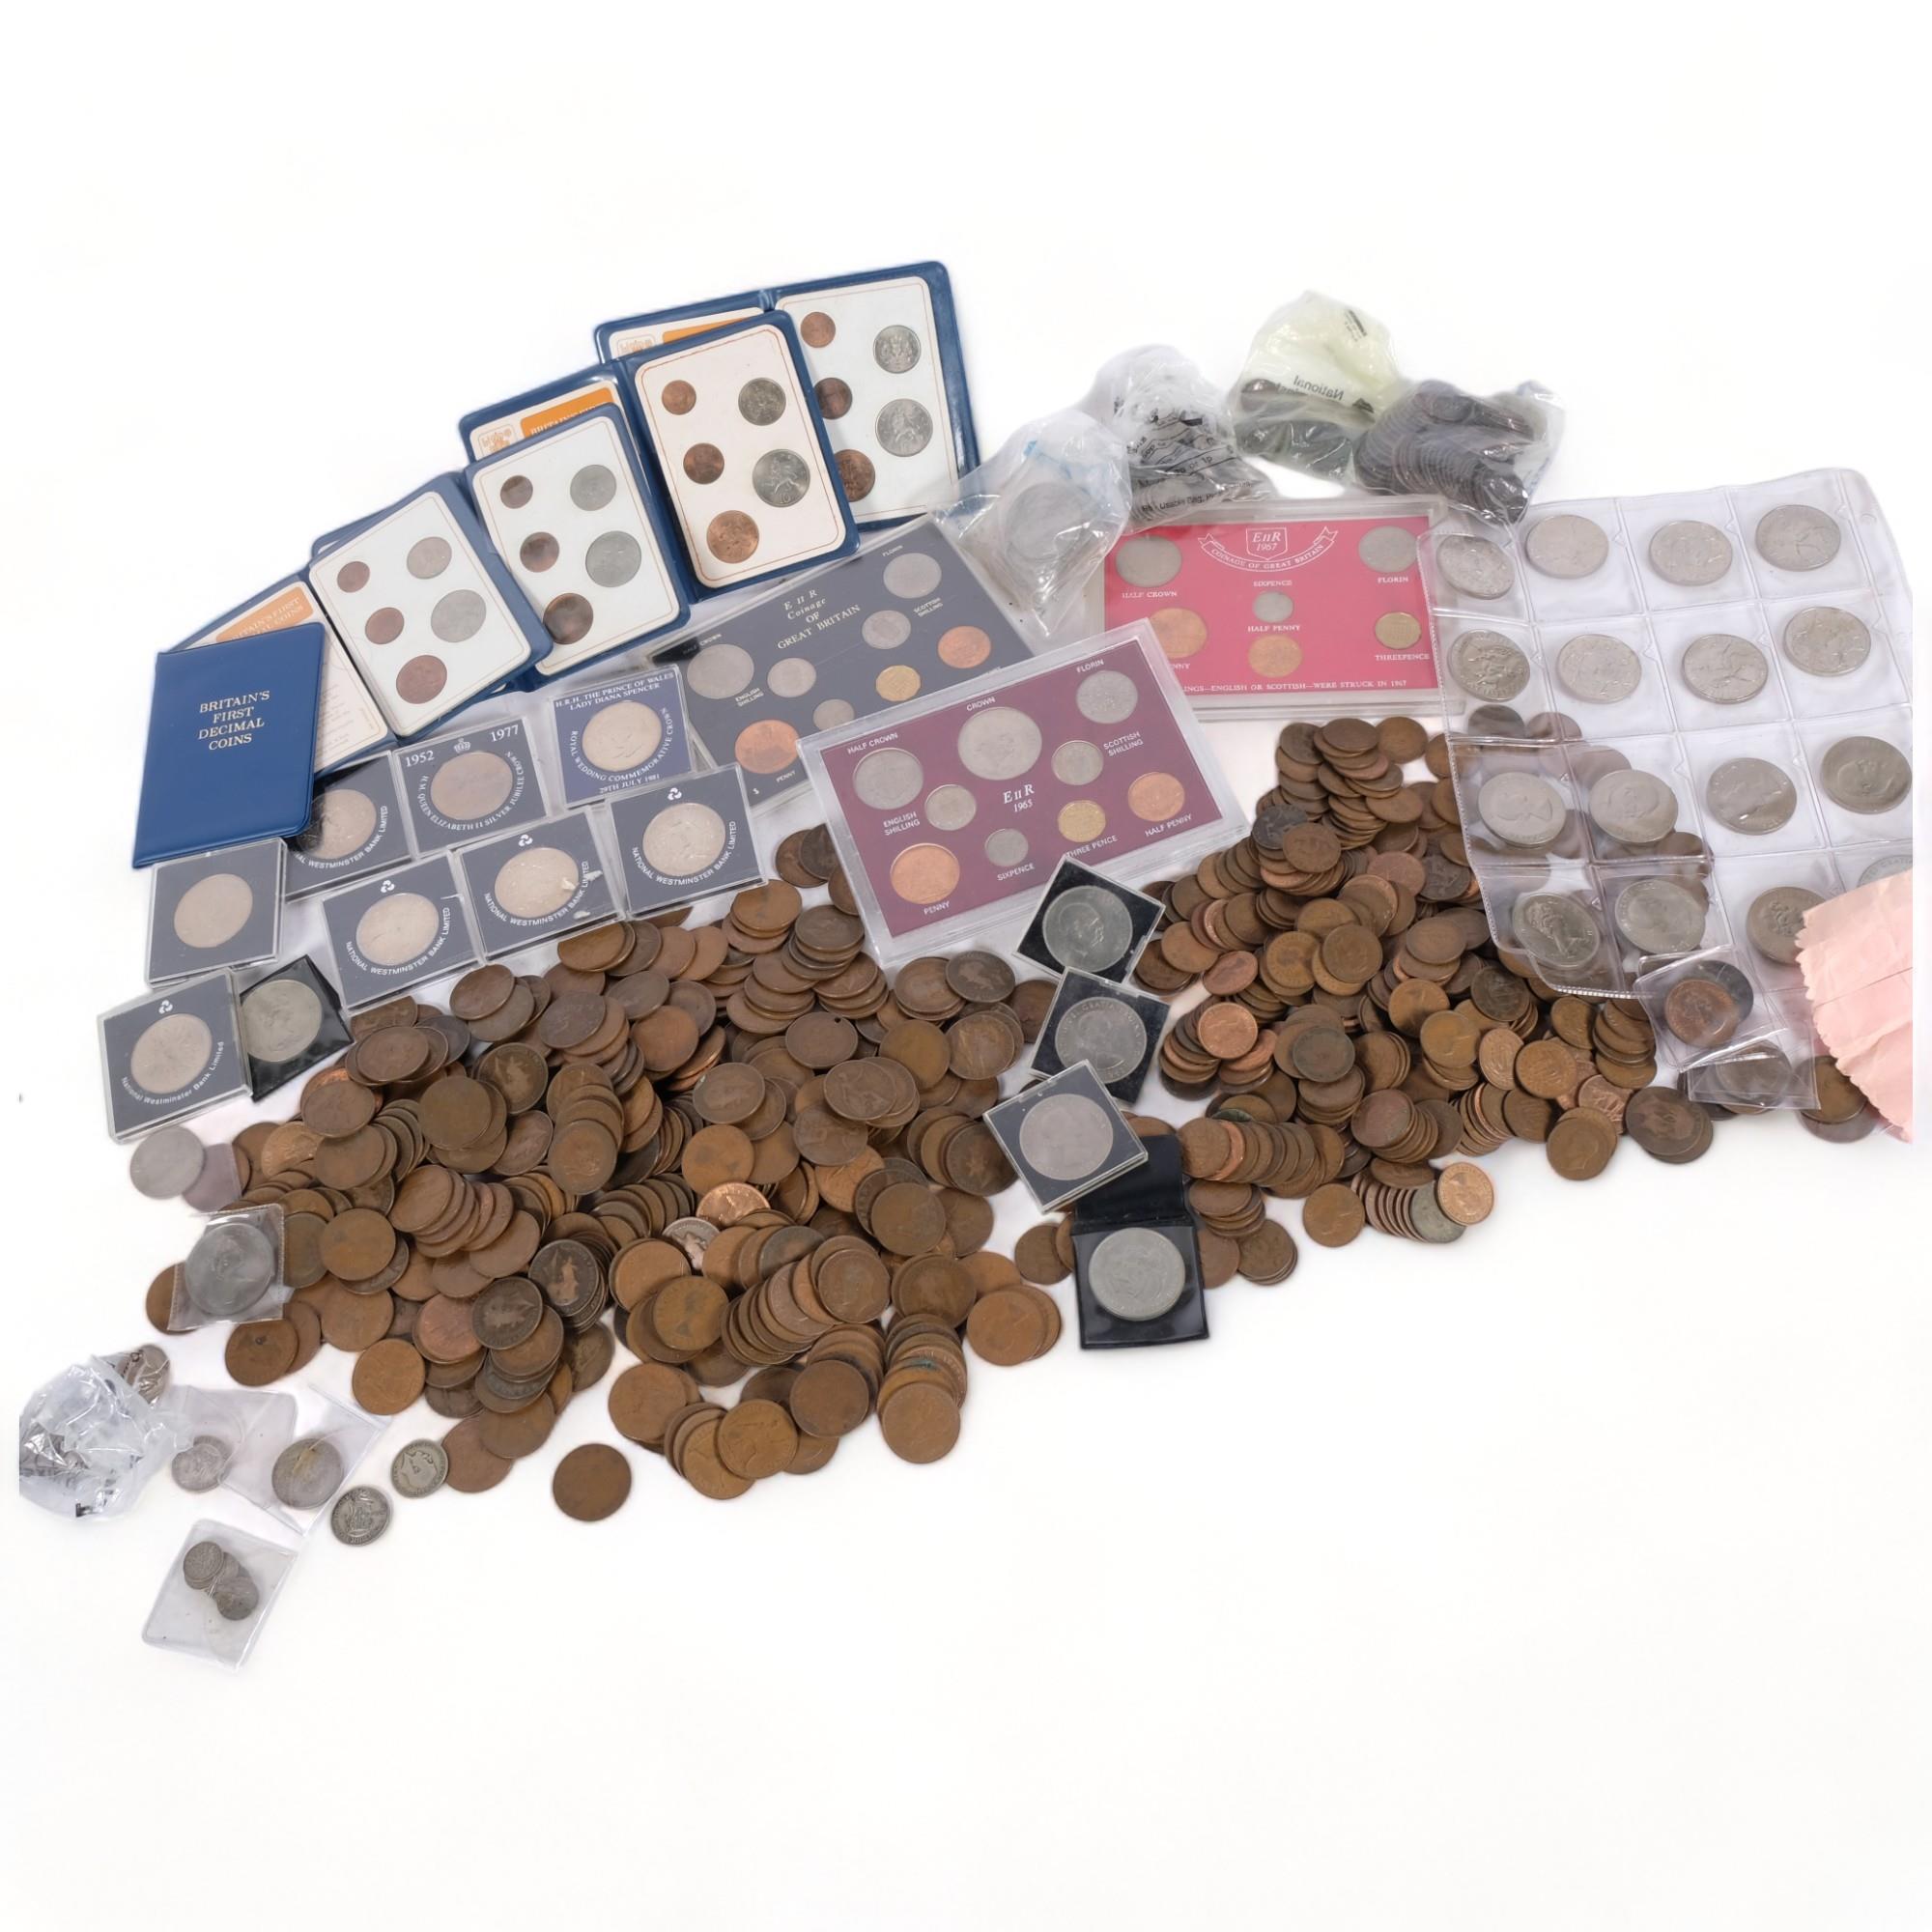 A quantity of British decimal and pre-decimal coinage, many loose coins and presentation packs,